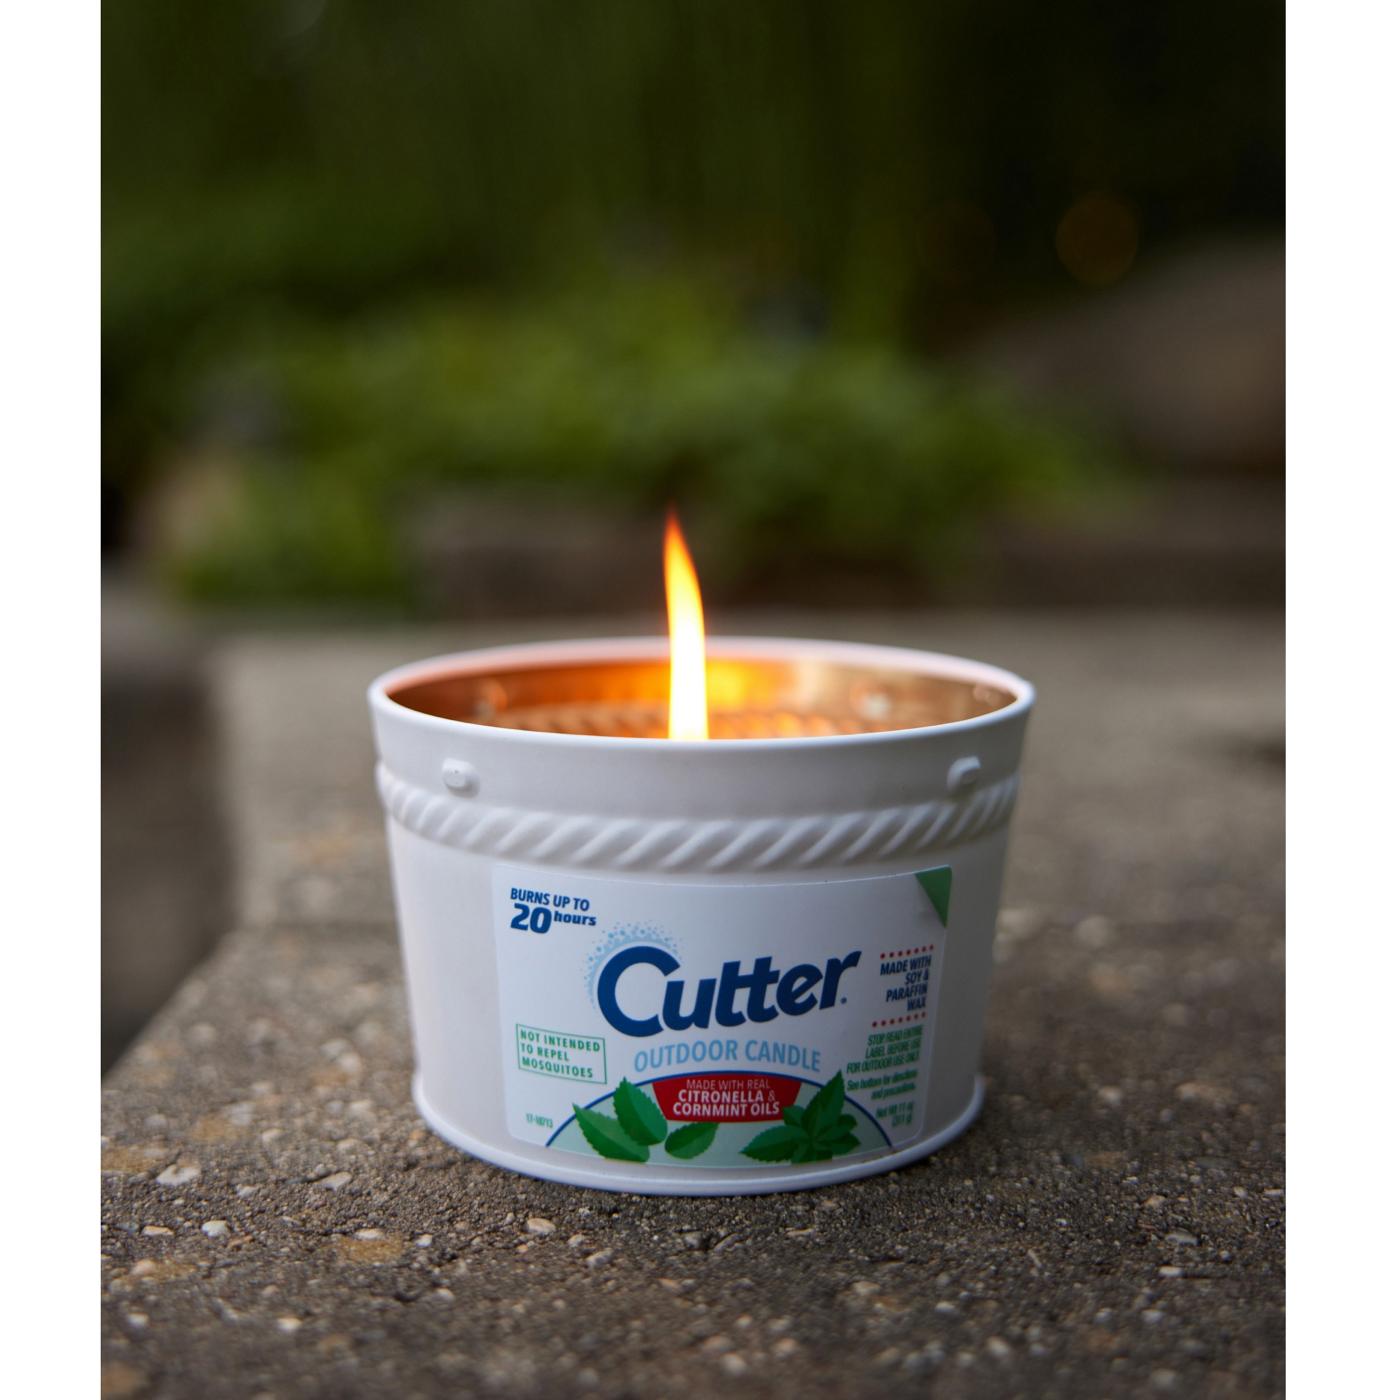 Cutter Citronella & Cornmint Scent Outdoor Candle Bucket; image 5 of 5